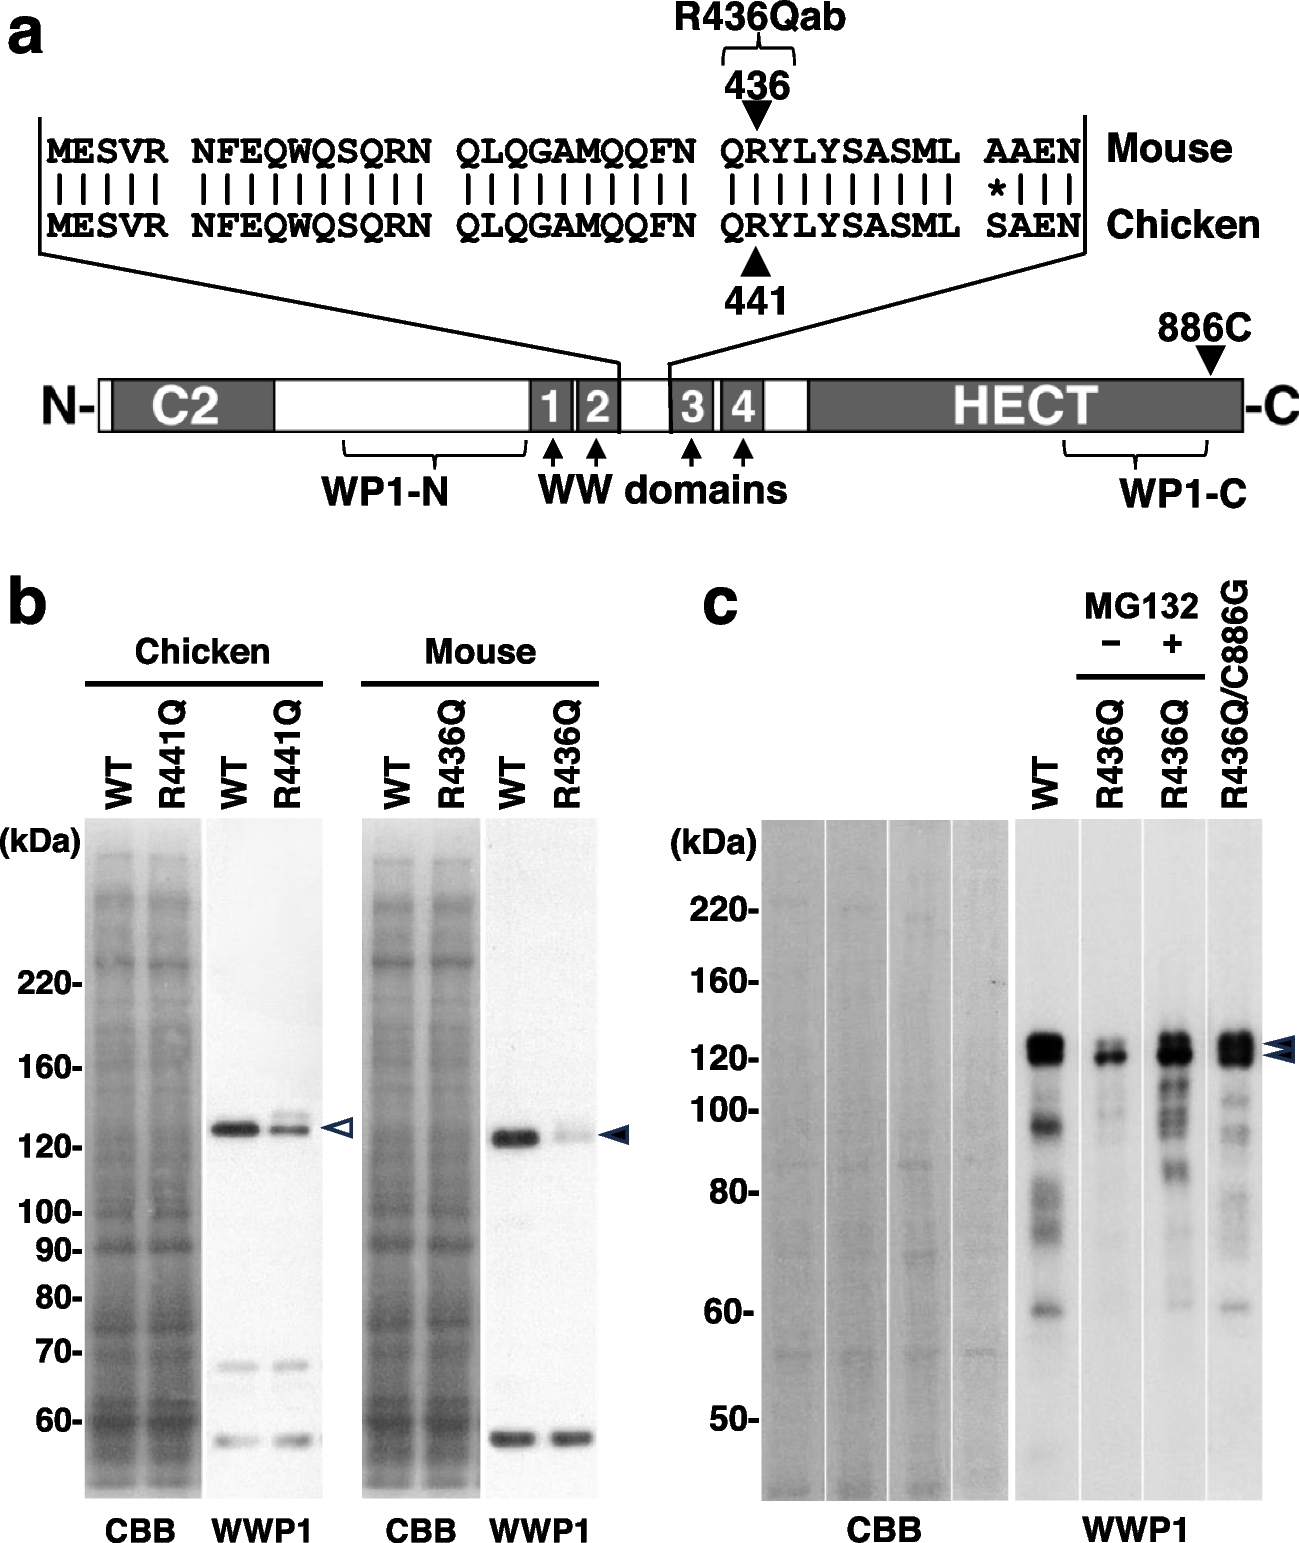 The R436Q missense mutation in WWP1 disrupts autoinhibition of its E3 ubiquitin ligase activity, leading to self-degradation and loss of function